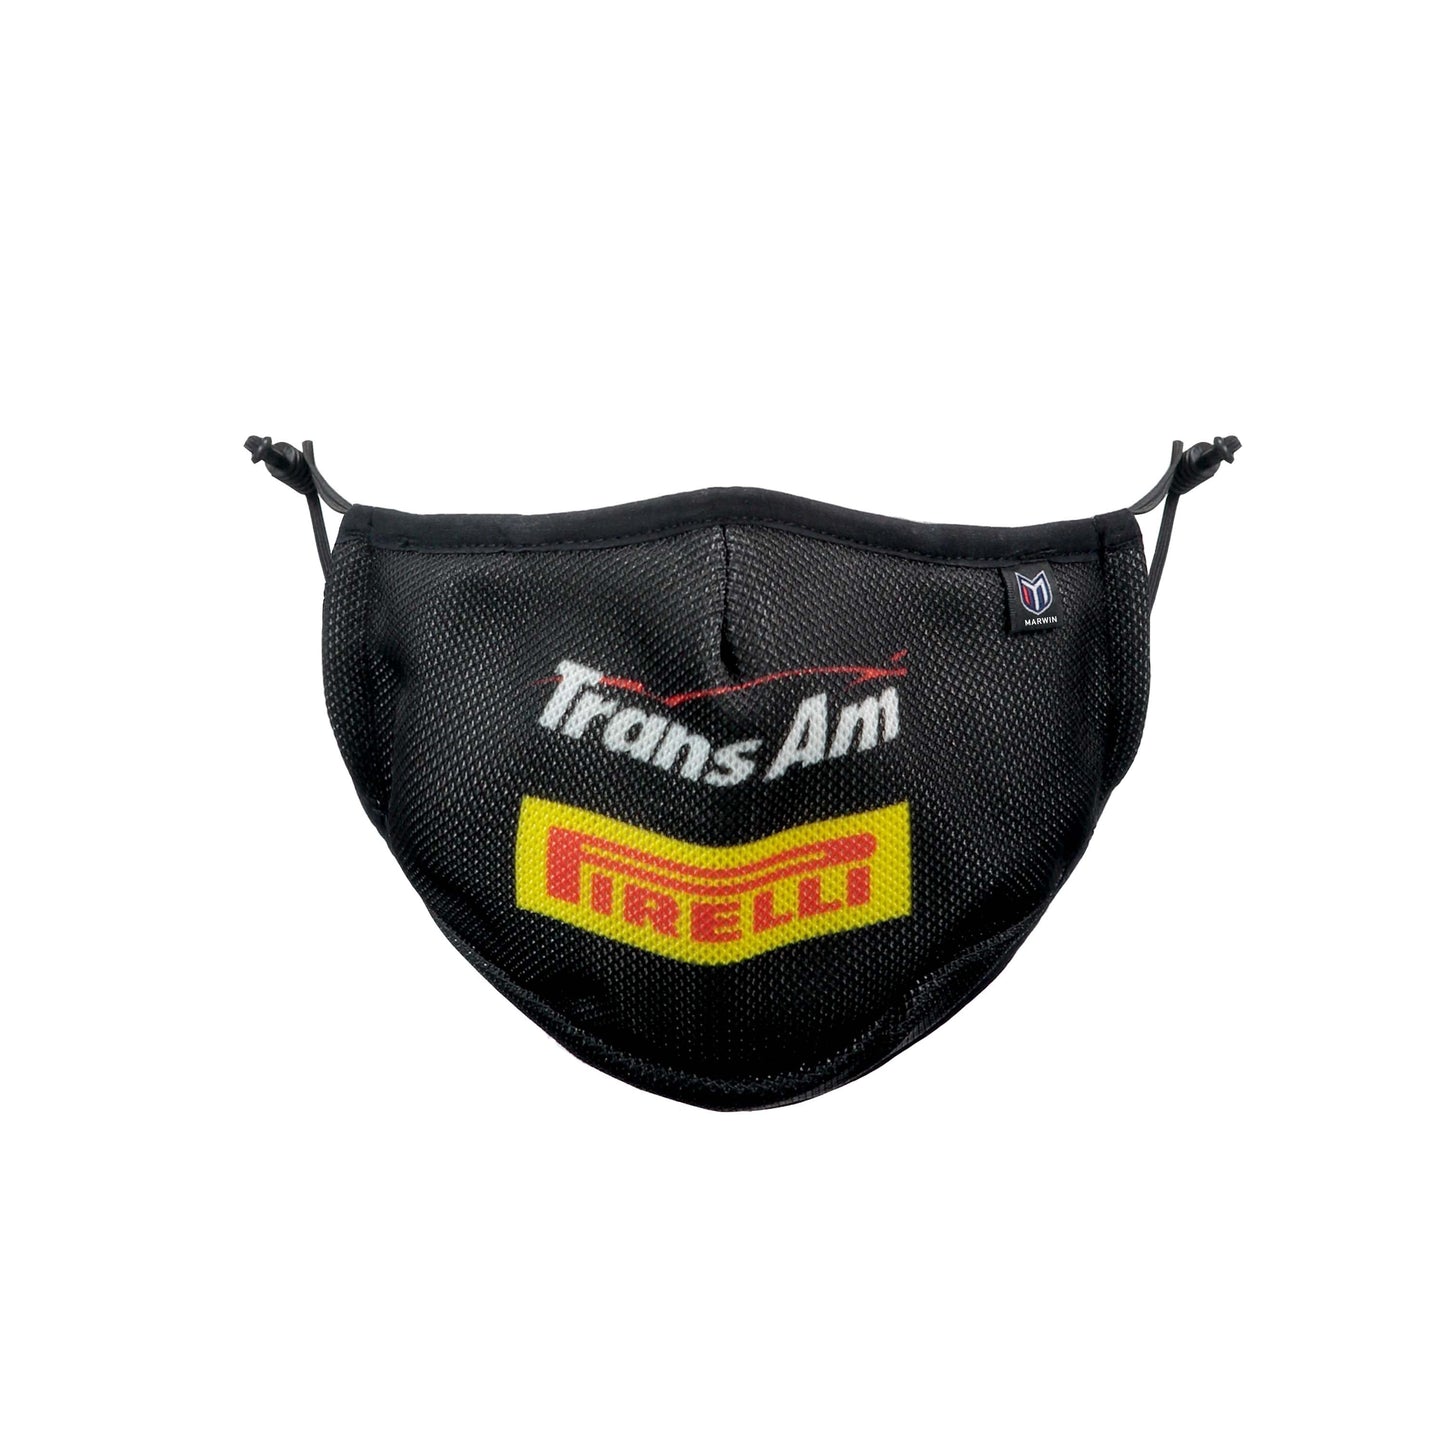 Trans Am - Facemask with Nanocoating Technology